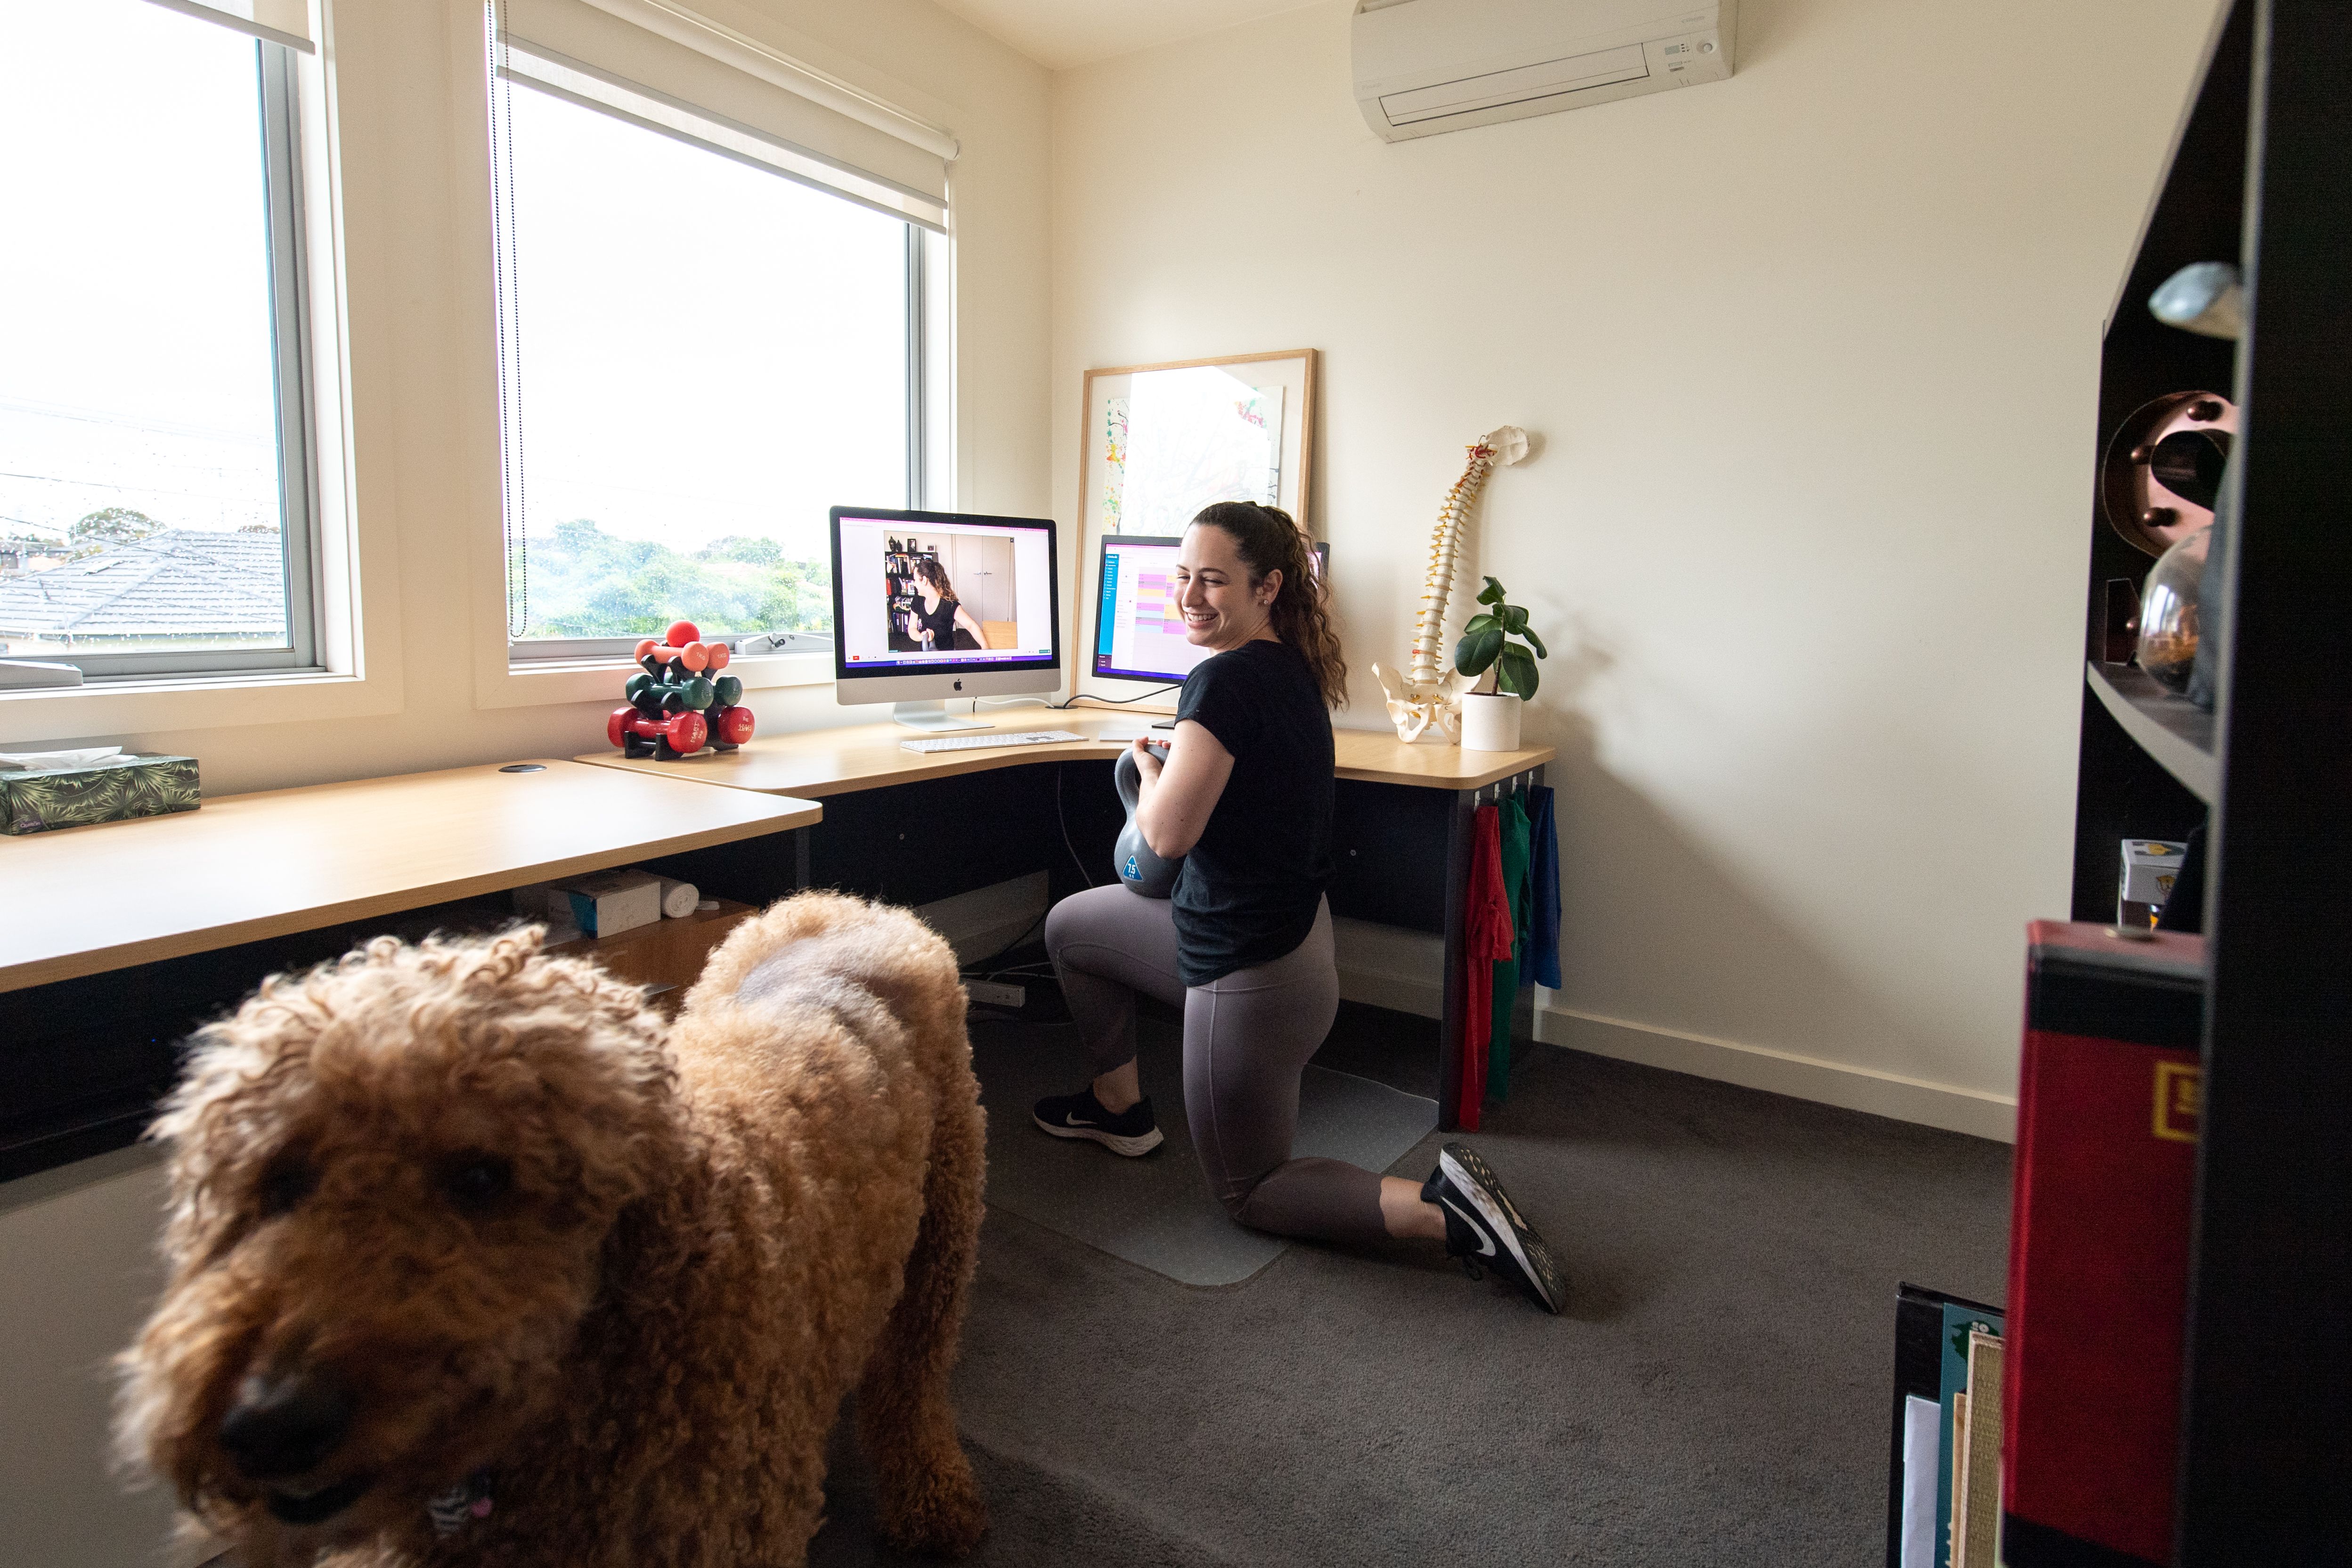 Simone Muscat in her home practice with her dog, Theo.